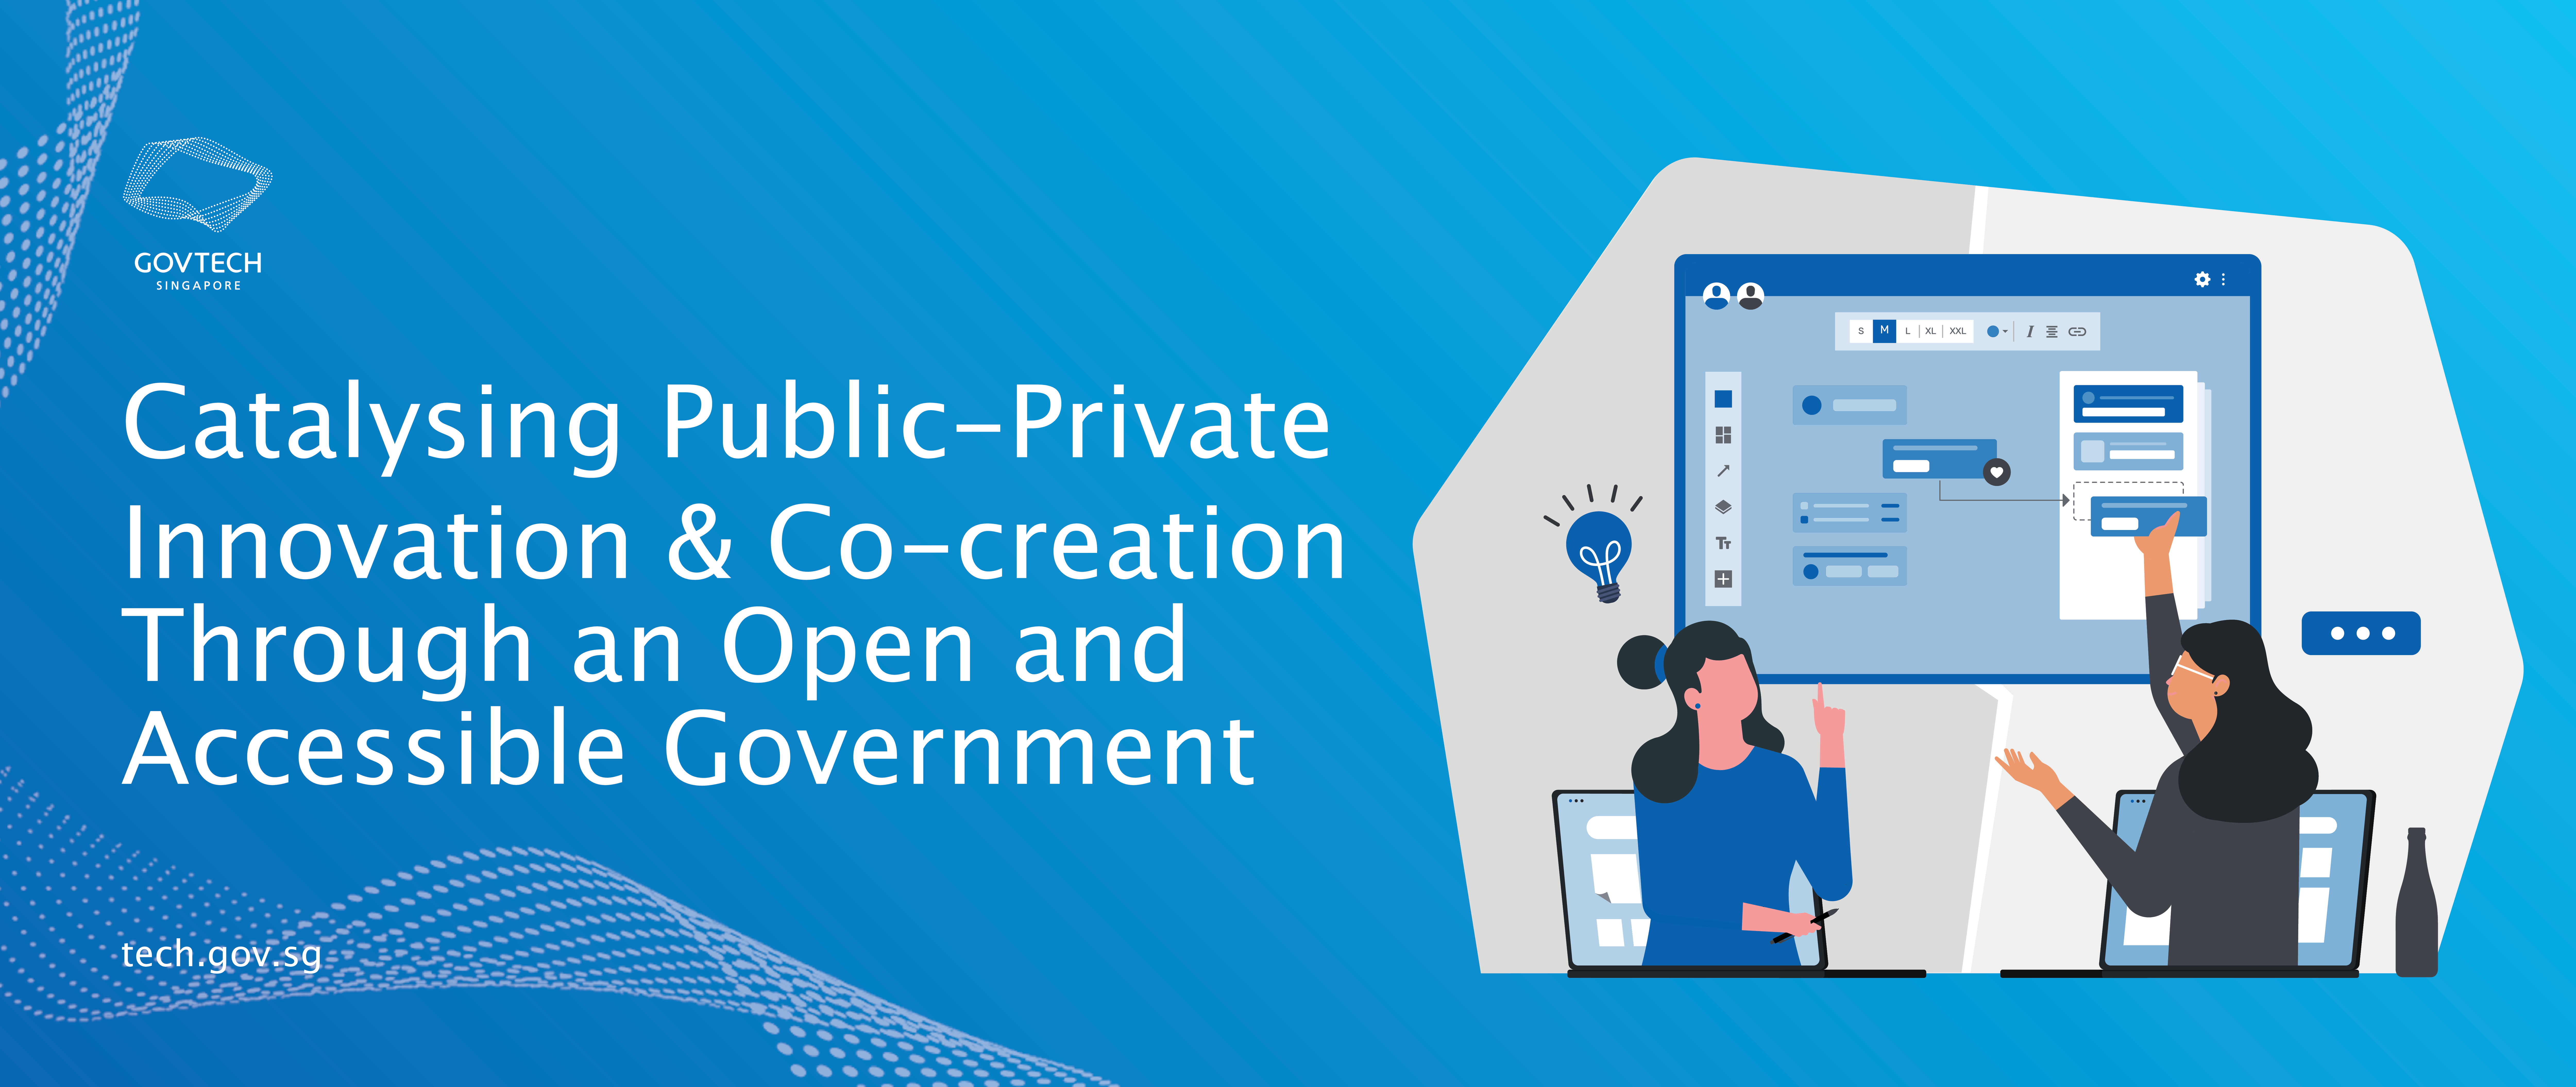 Catalysing Public-Private Innovation & Co-creation Through an Open and Accessible Government